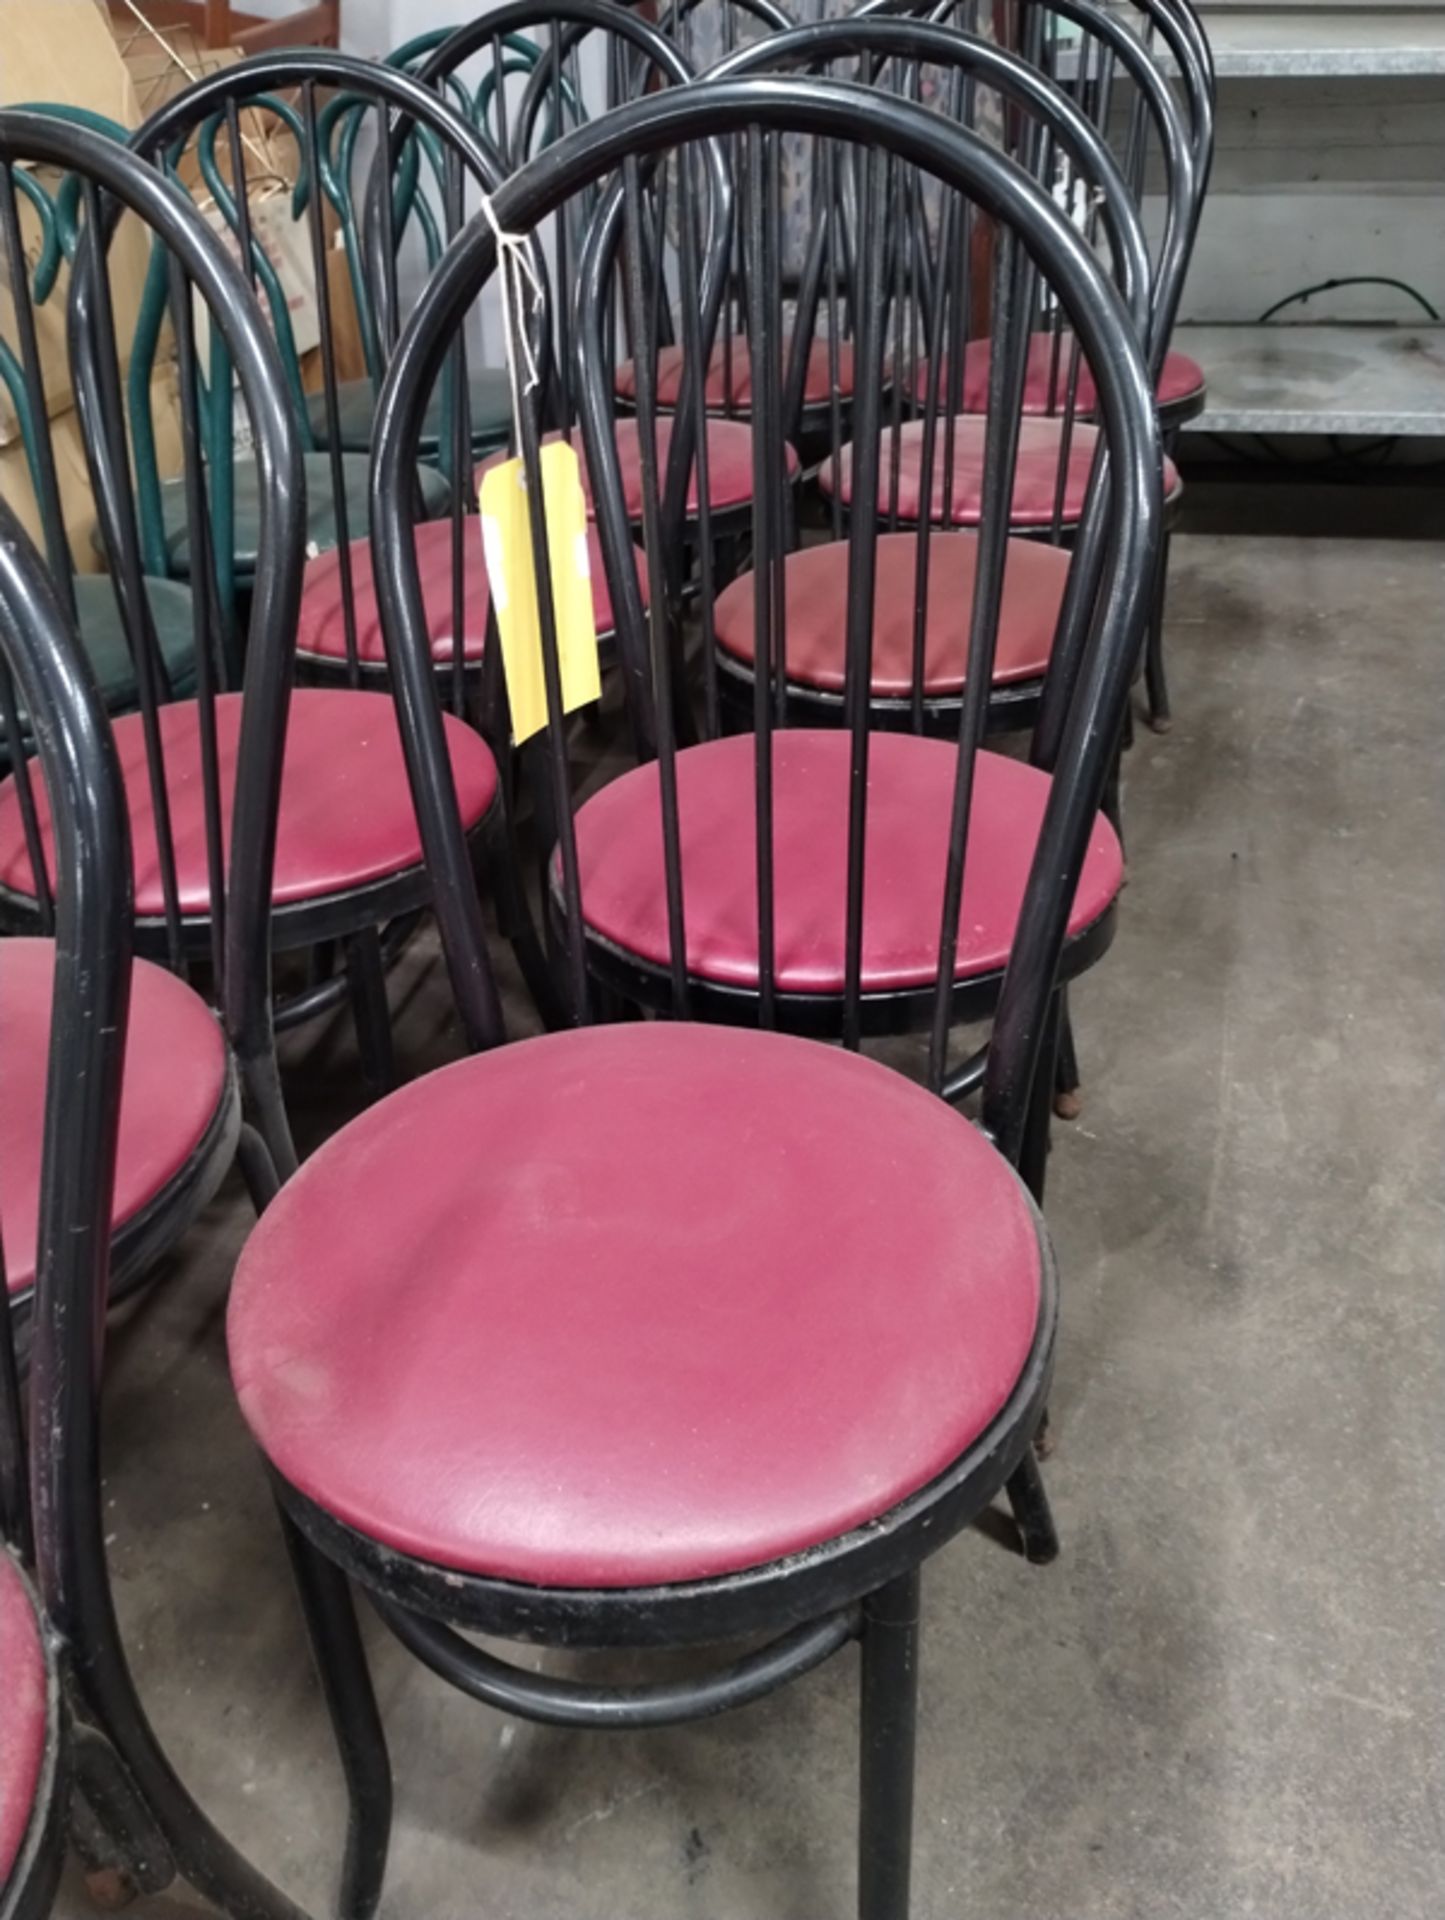 11 RESTAURANT CHAIRS - BLACK AND RED WITH METAL FRAME - Image 2 of 4